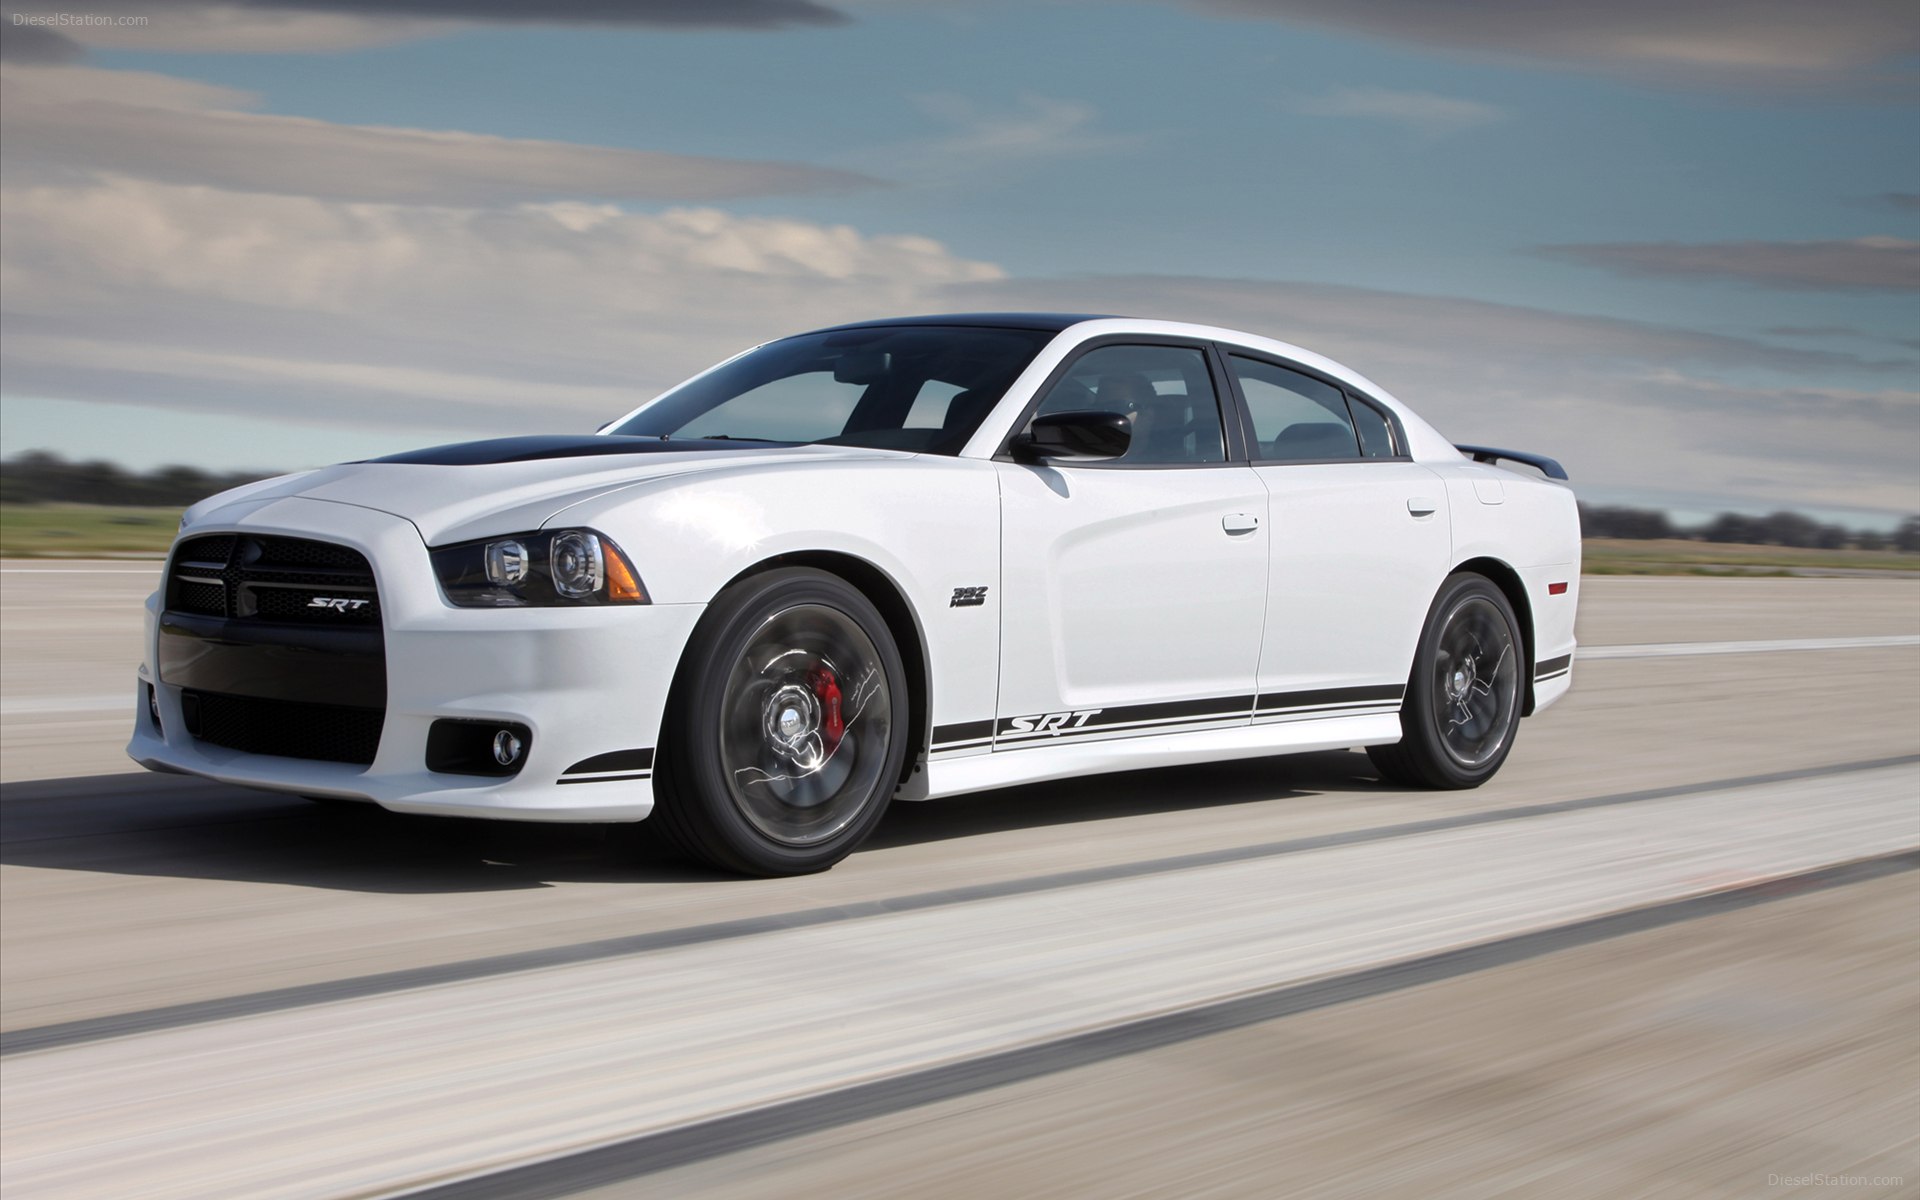 Dodge Charger Srt8 Widescreen Exotic Car Picture Of